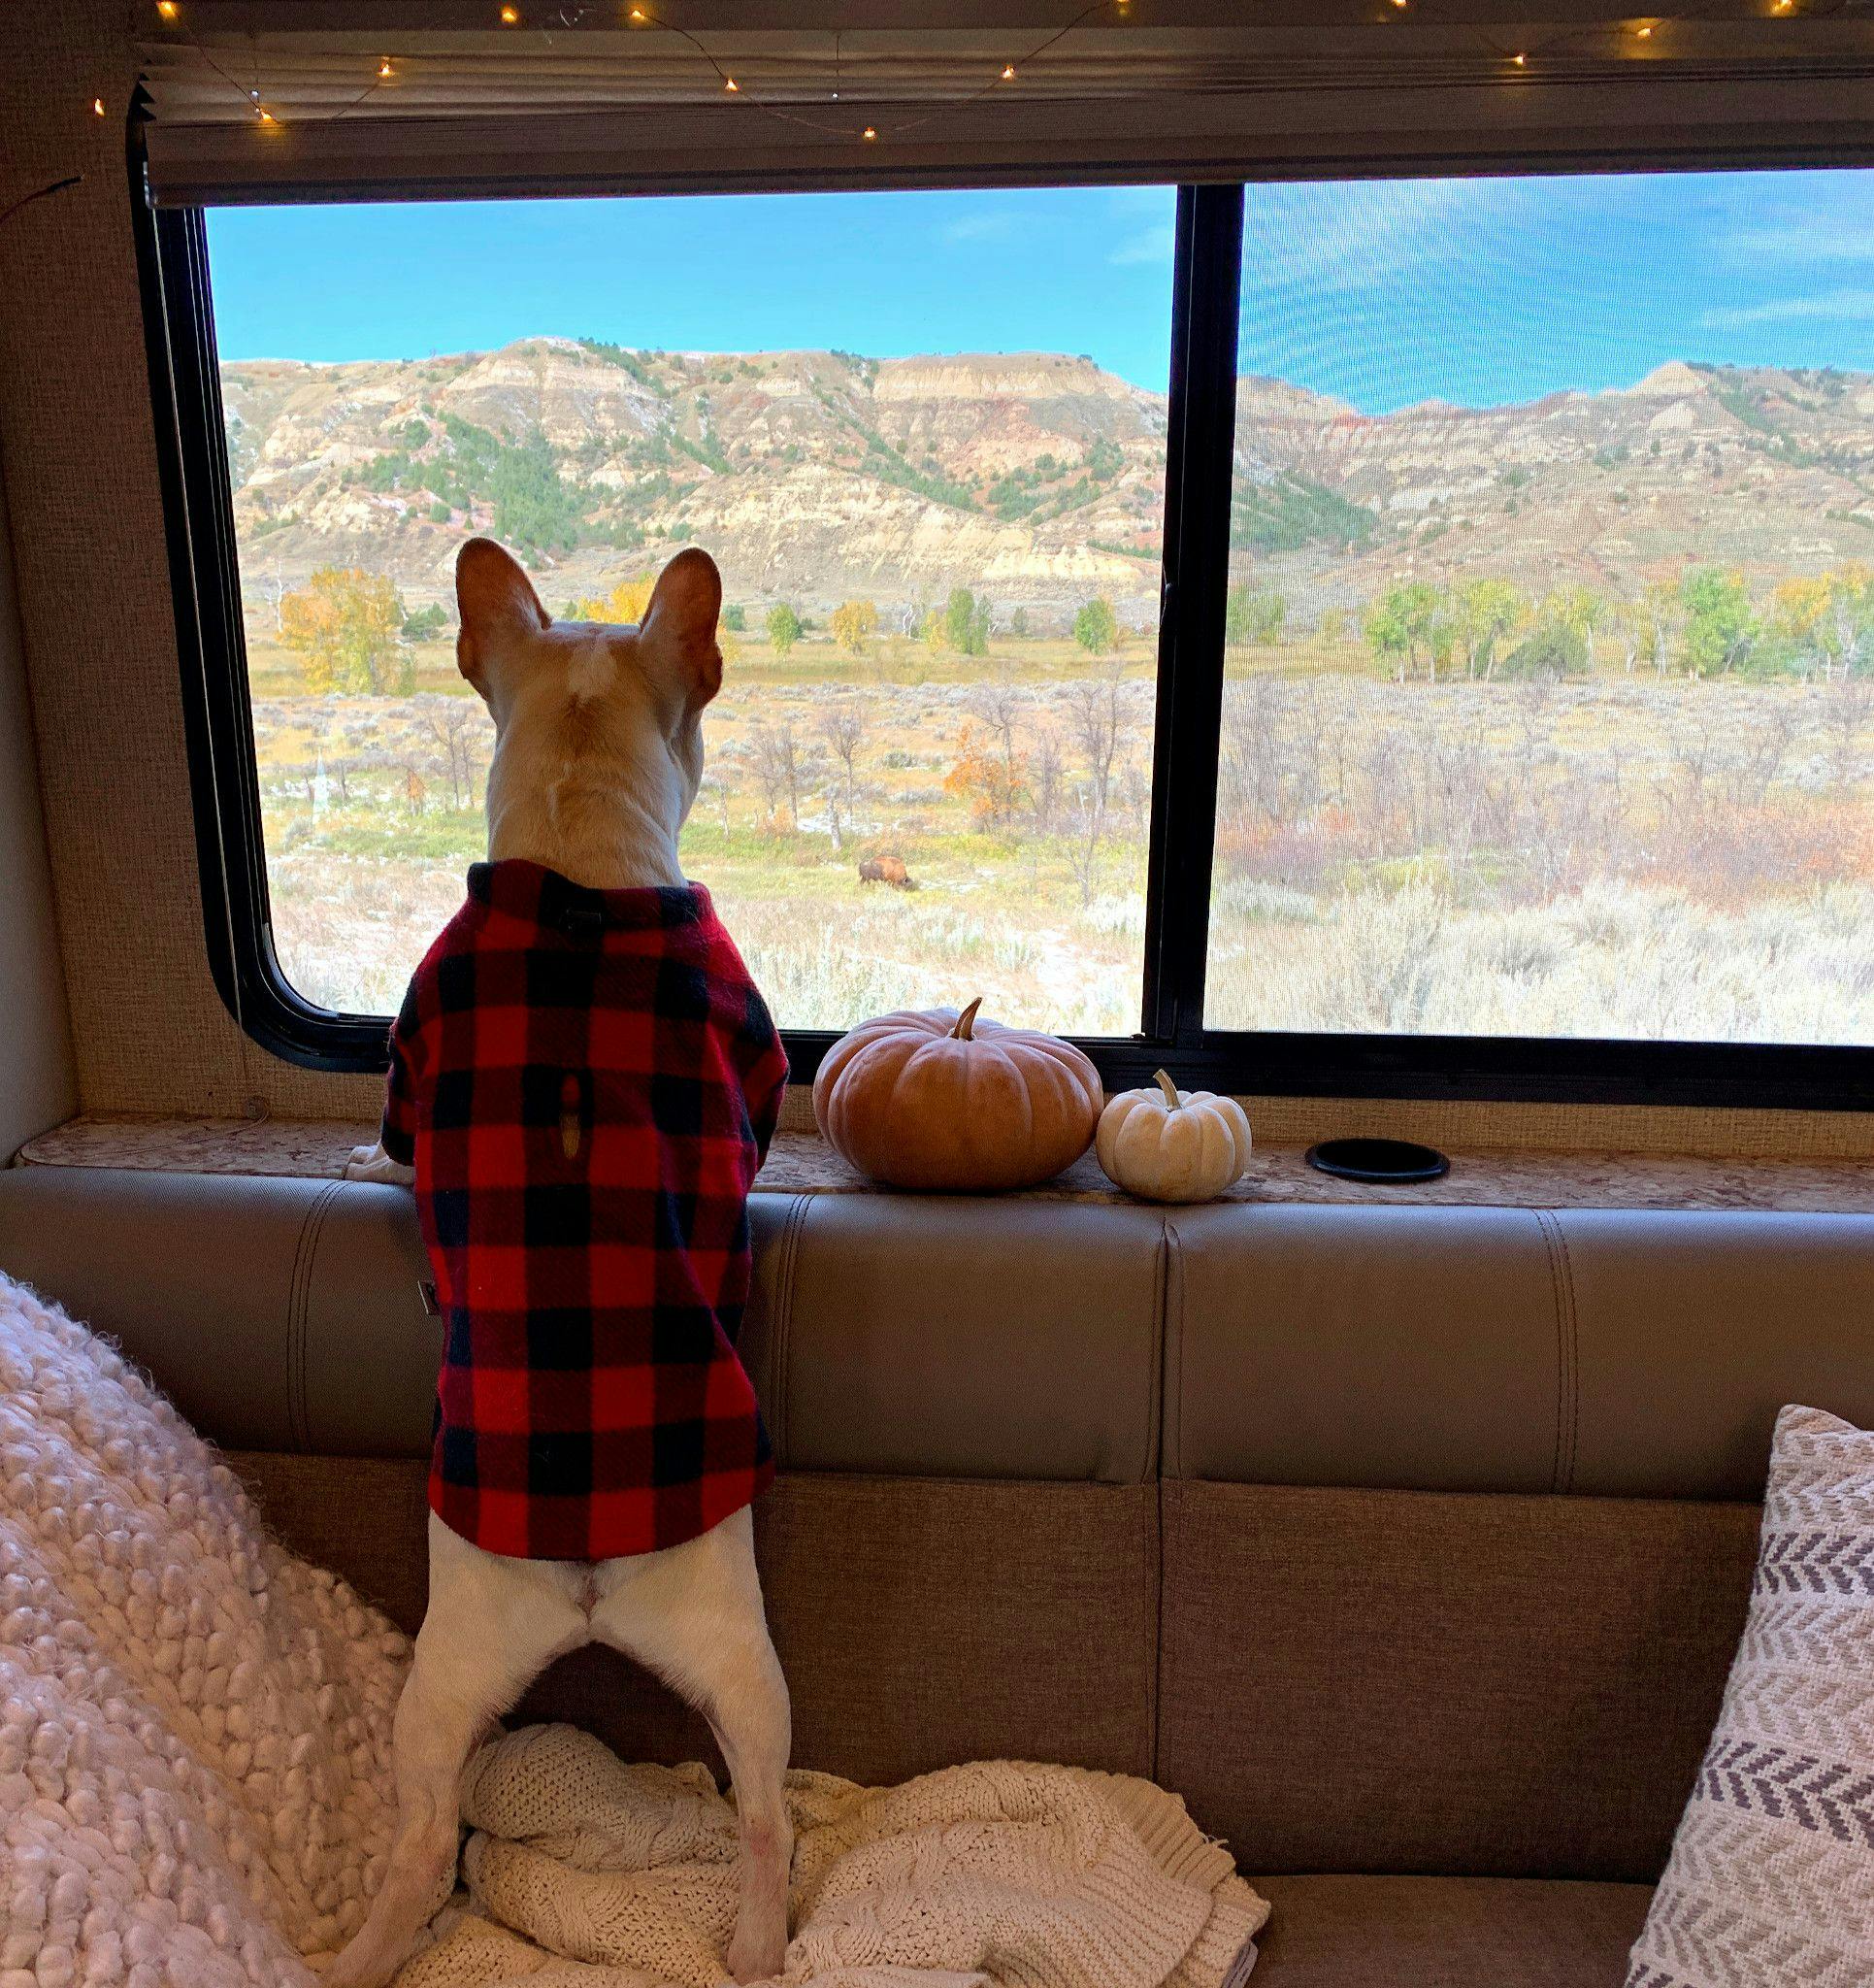 Sarah Hubbart's dog in a sweater looking outside the window of their RV next to two small pumpkins